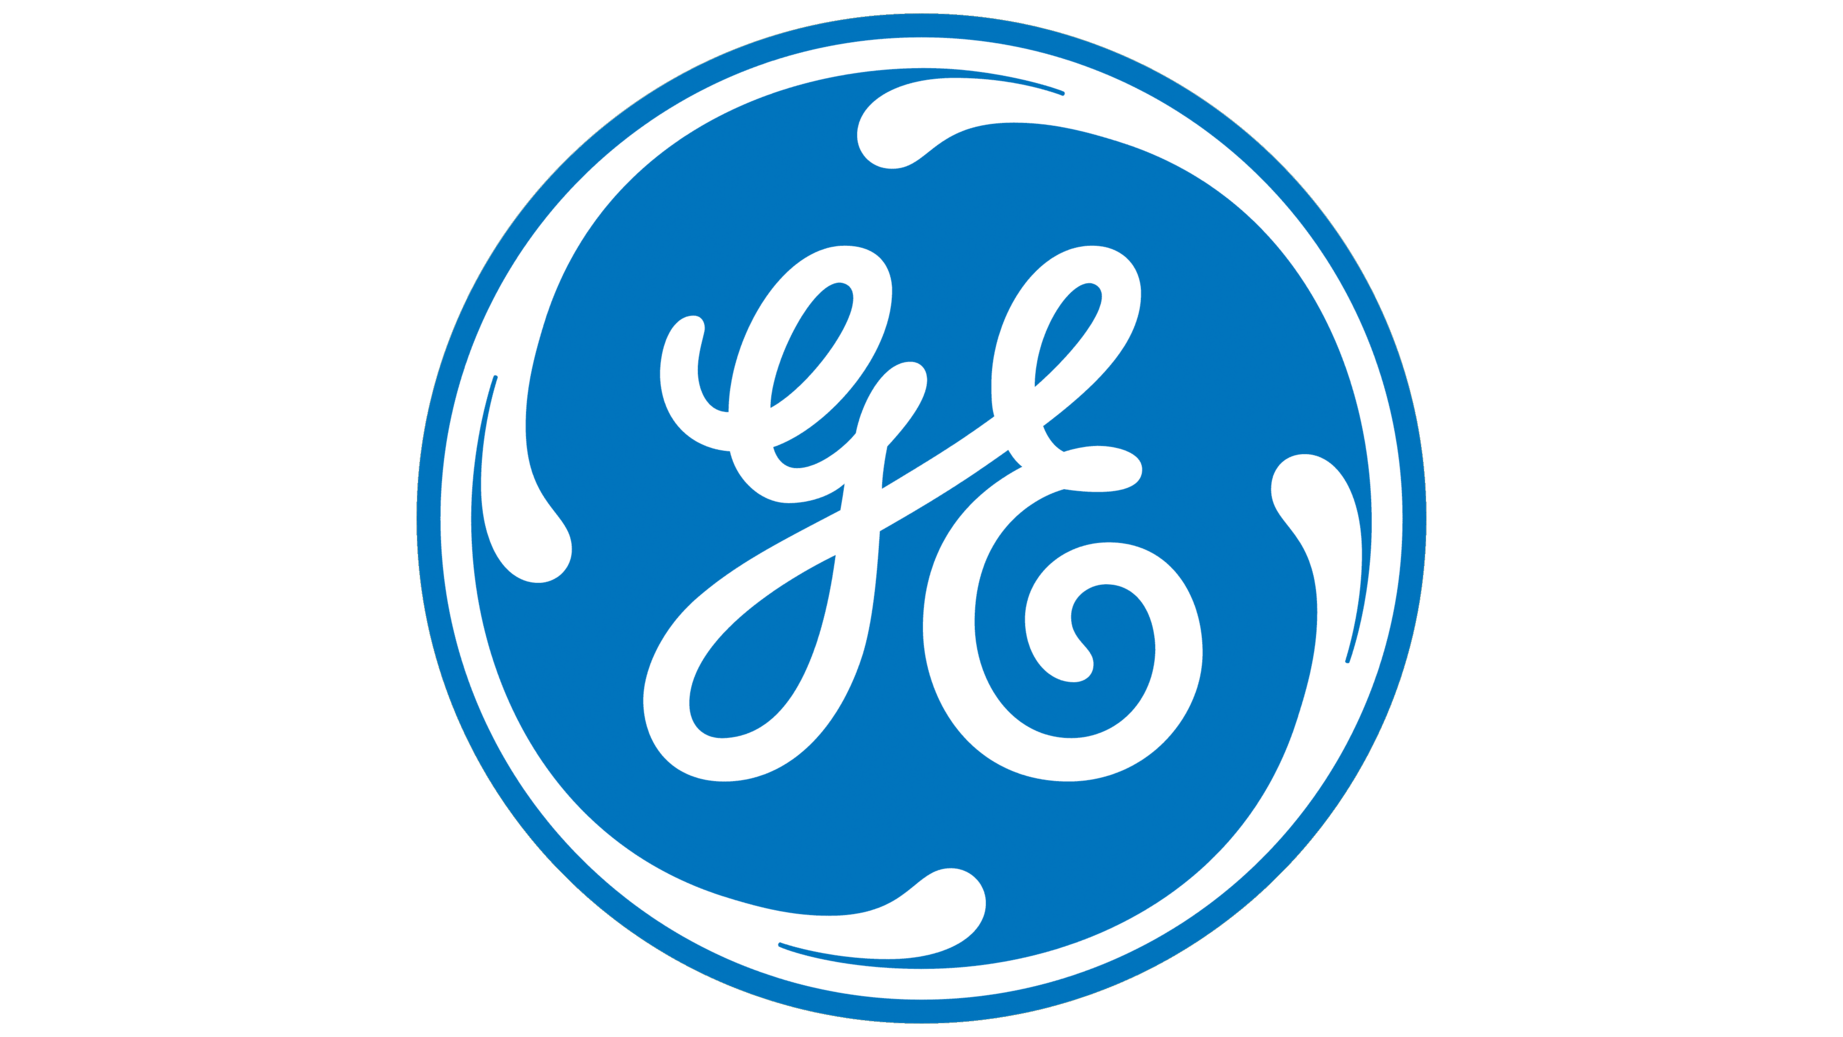 General electric sign